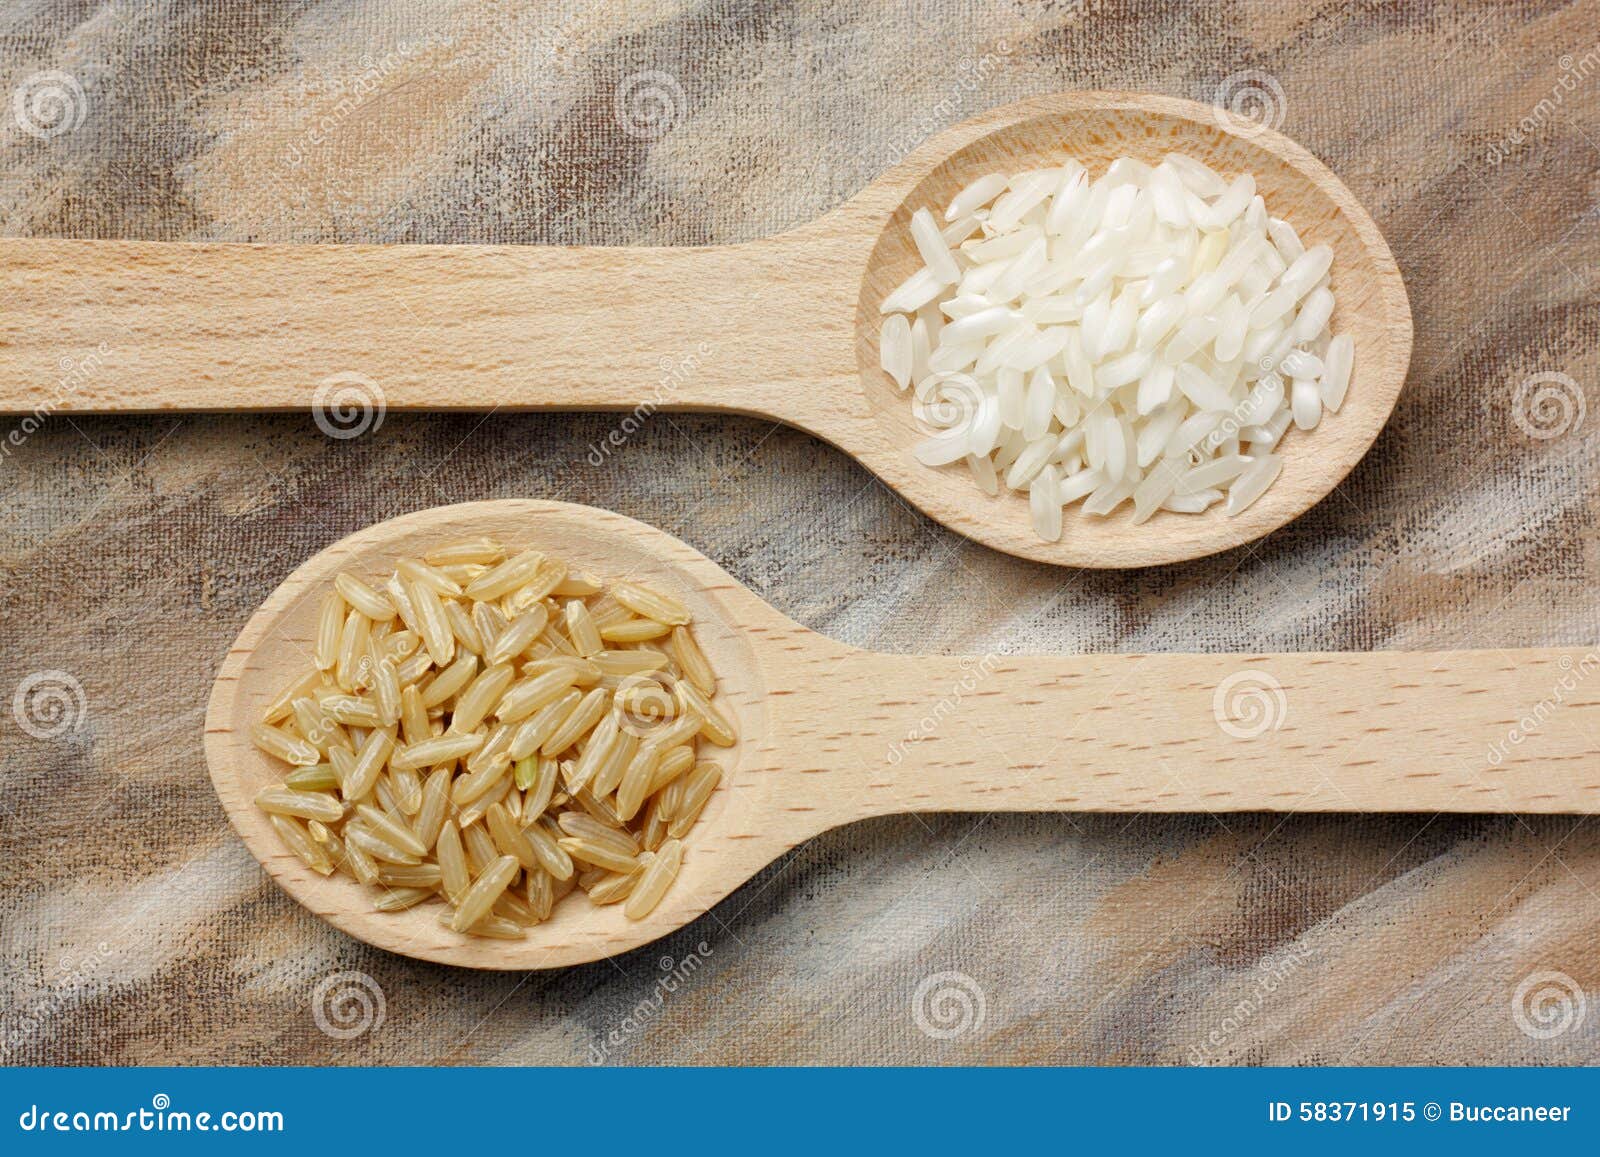 two wooden spoons with white and brown rice grains